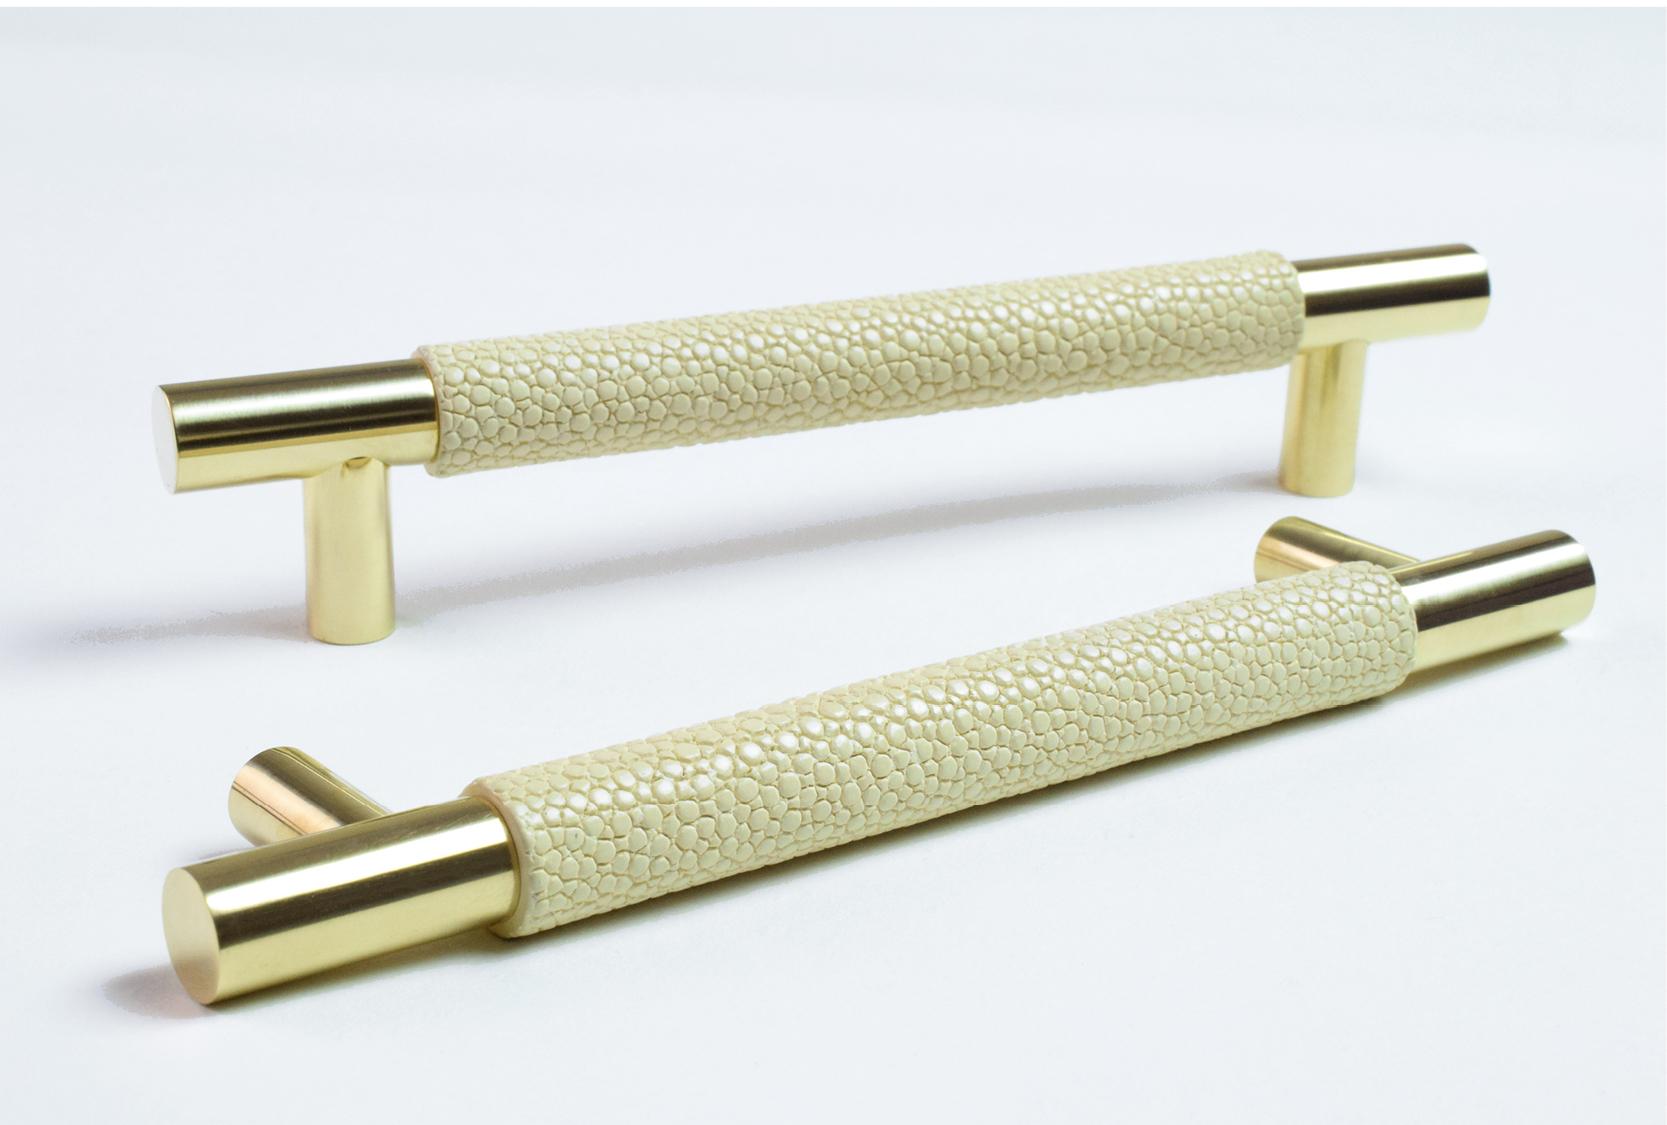 Image displays two custom shagreen cabinet pulls. One of the cabinet pulls are positioned on the side. The shagreen grip is in a custom cream colour. The pull ends and legs are finished in polished brass.